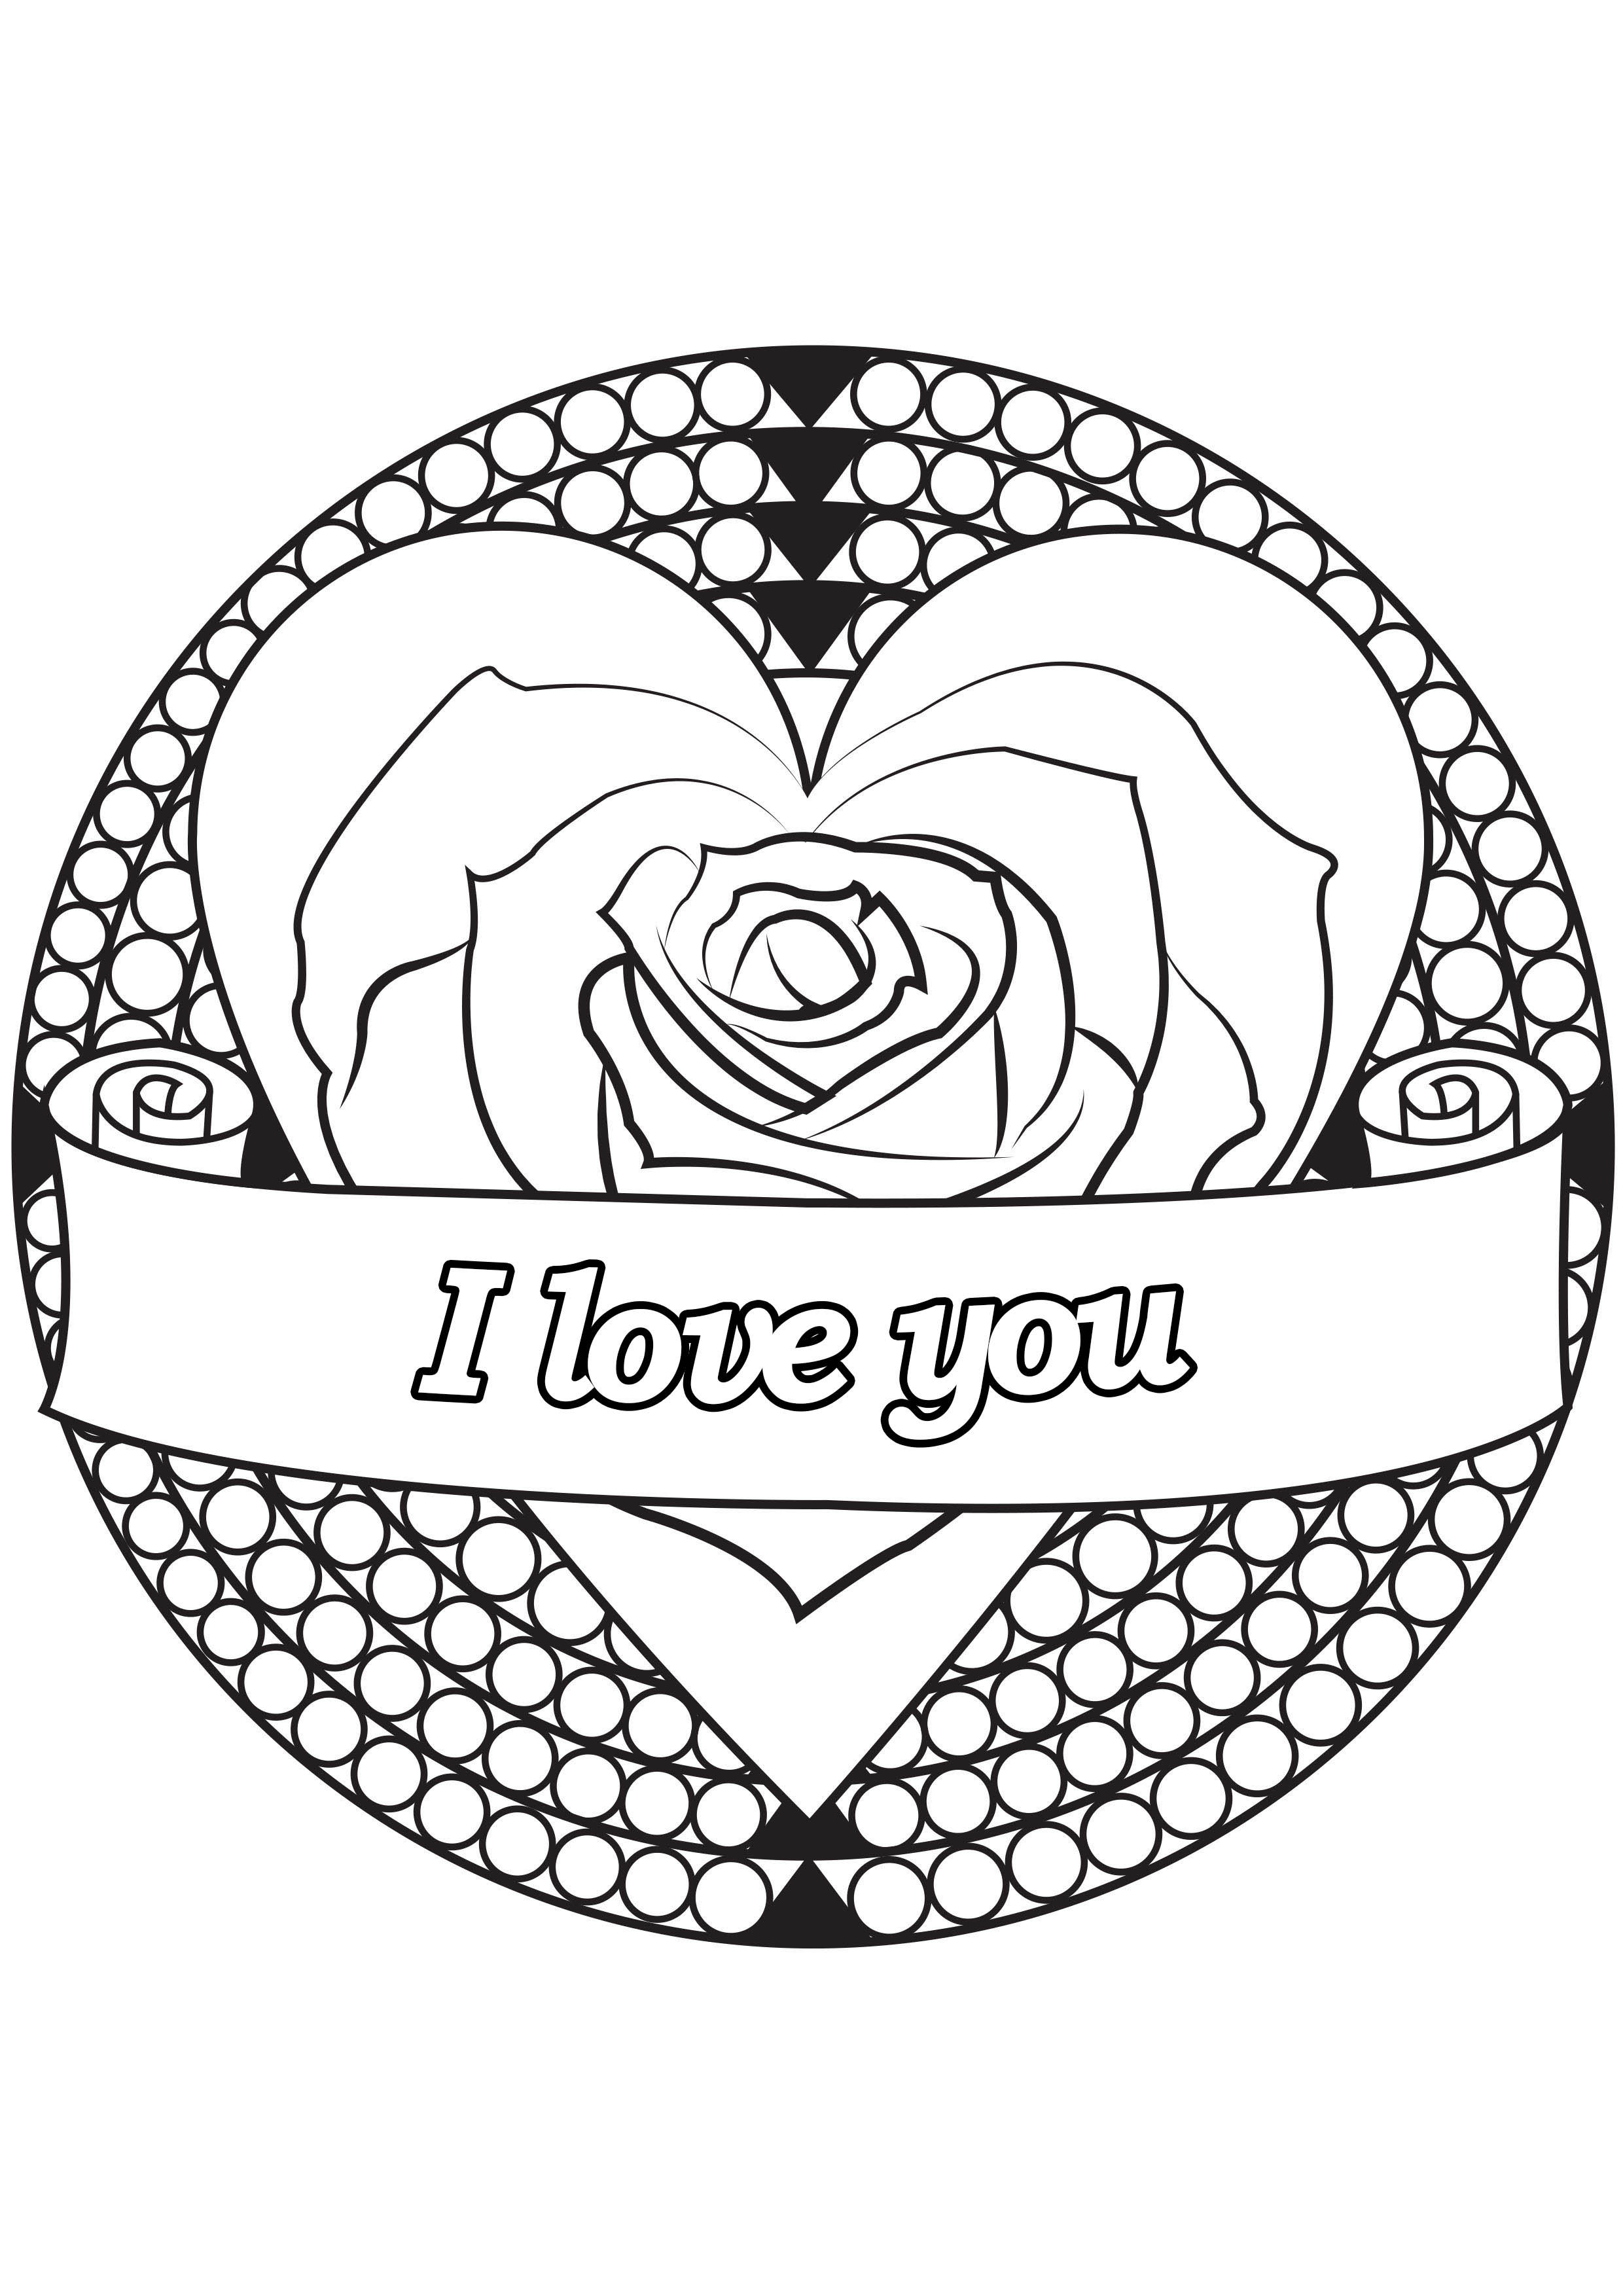 Valentine's Day coloring page - Heart & rose, Artist : Allan